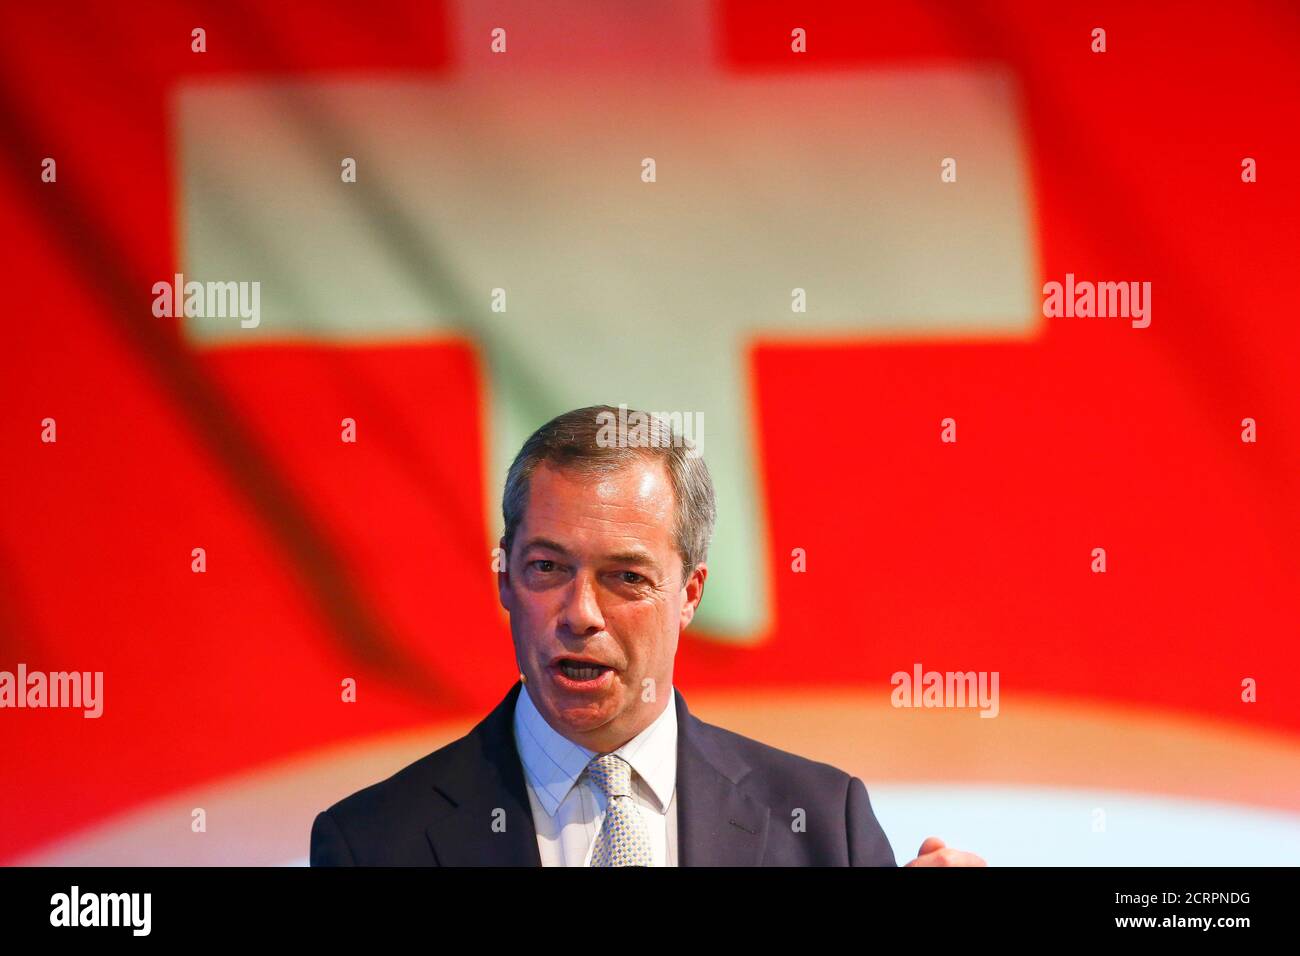 Nigel Farage, leader of the United Kingdom Independence Party (UKIP) delivers a speech during an extra-ordinary meeting of the Action for an Independent and Neutral Switzerland AUNS in the northern Swiss town of Winterthur October 4, 2014.  REUTERS/Arnd Wiegmann (SWITZERLAND - Tags: POLITICS HEADSHOT) Stock Photo